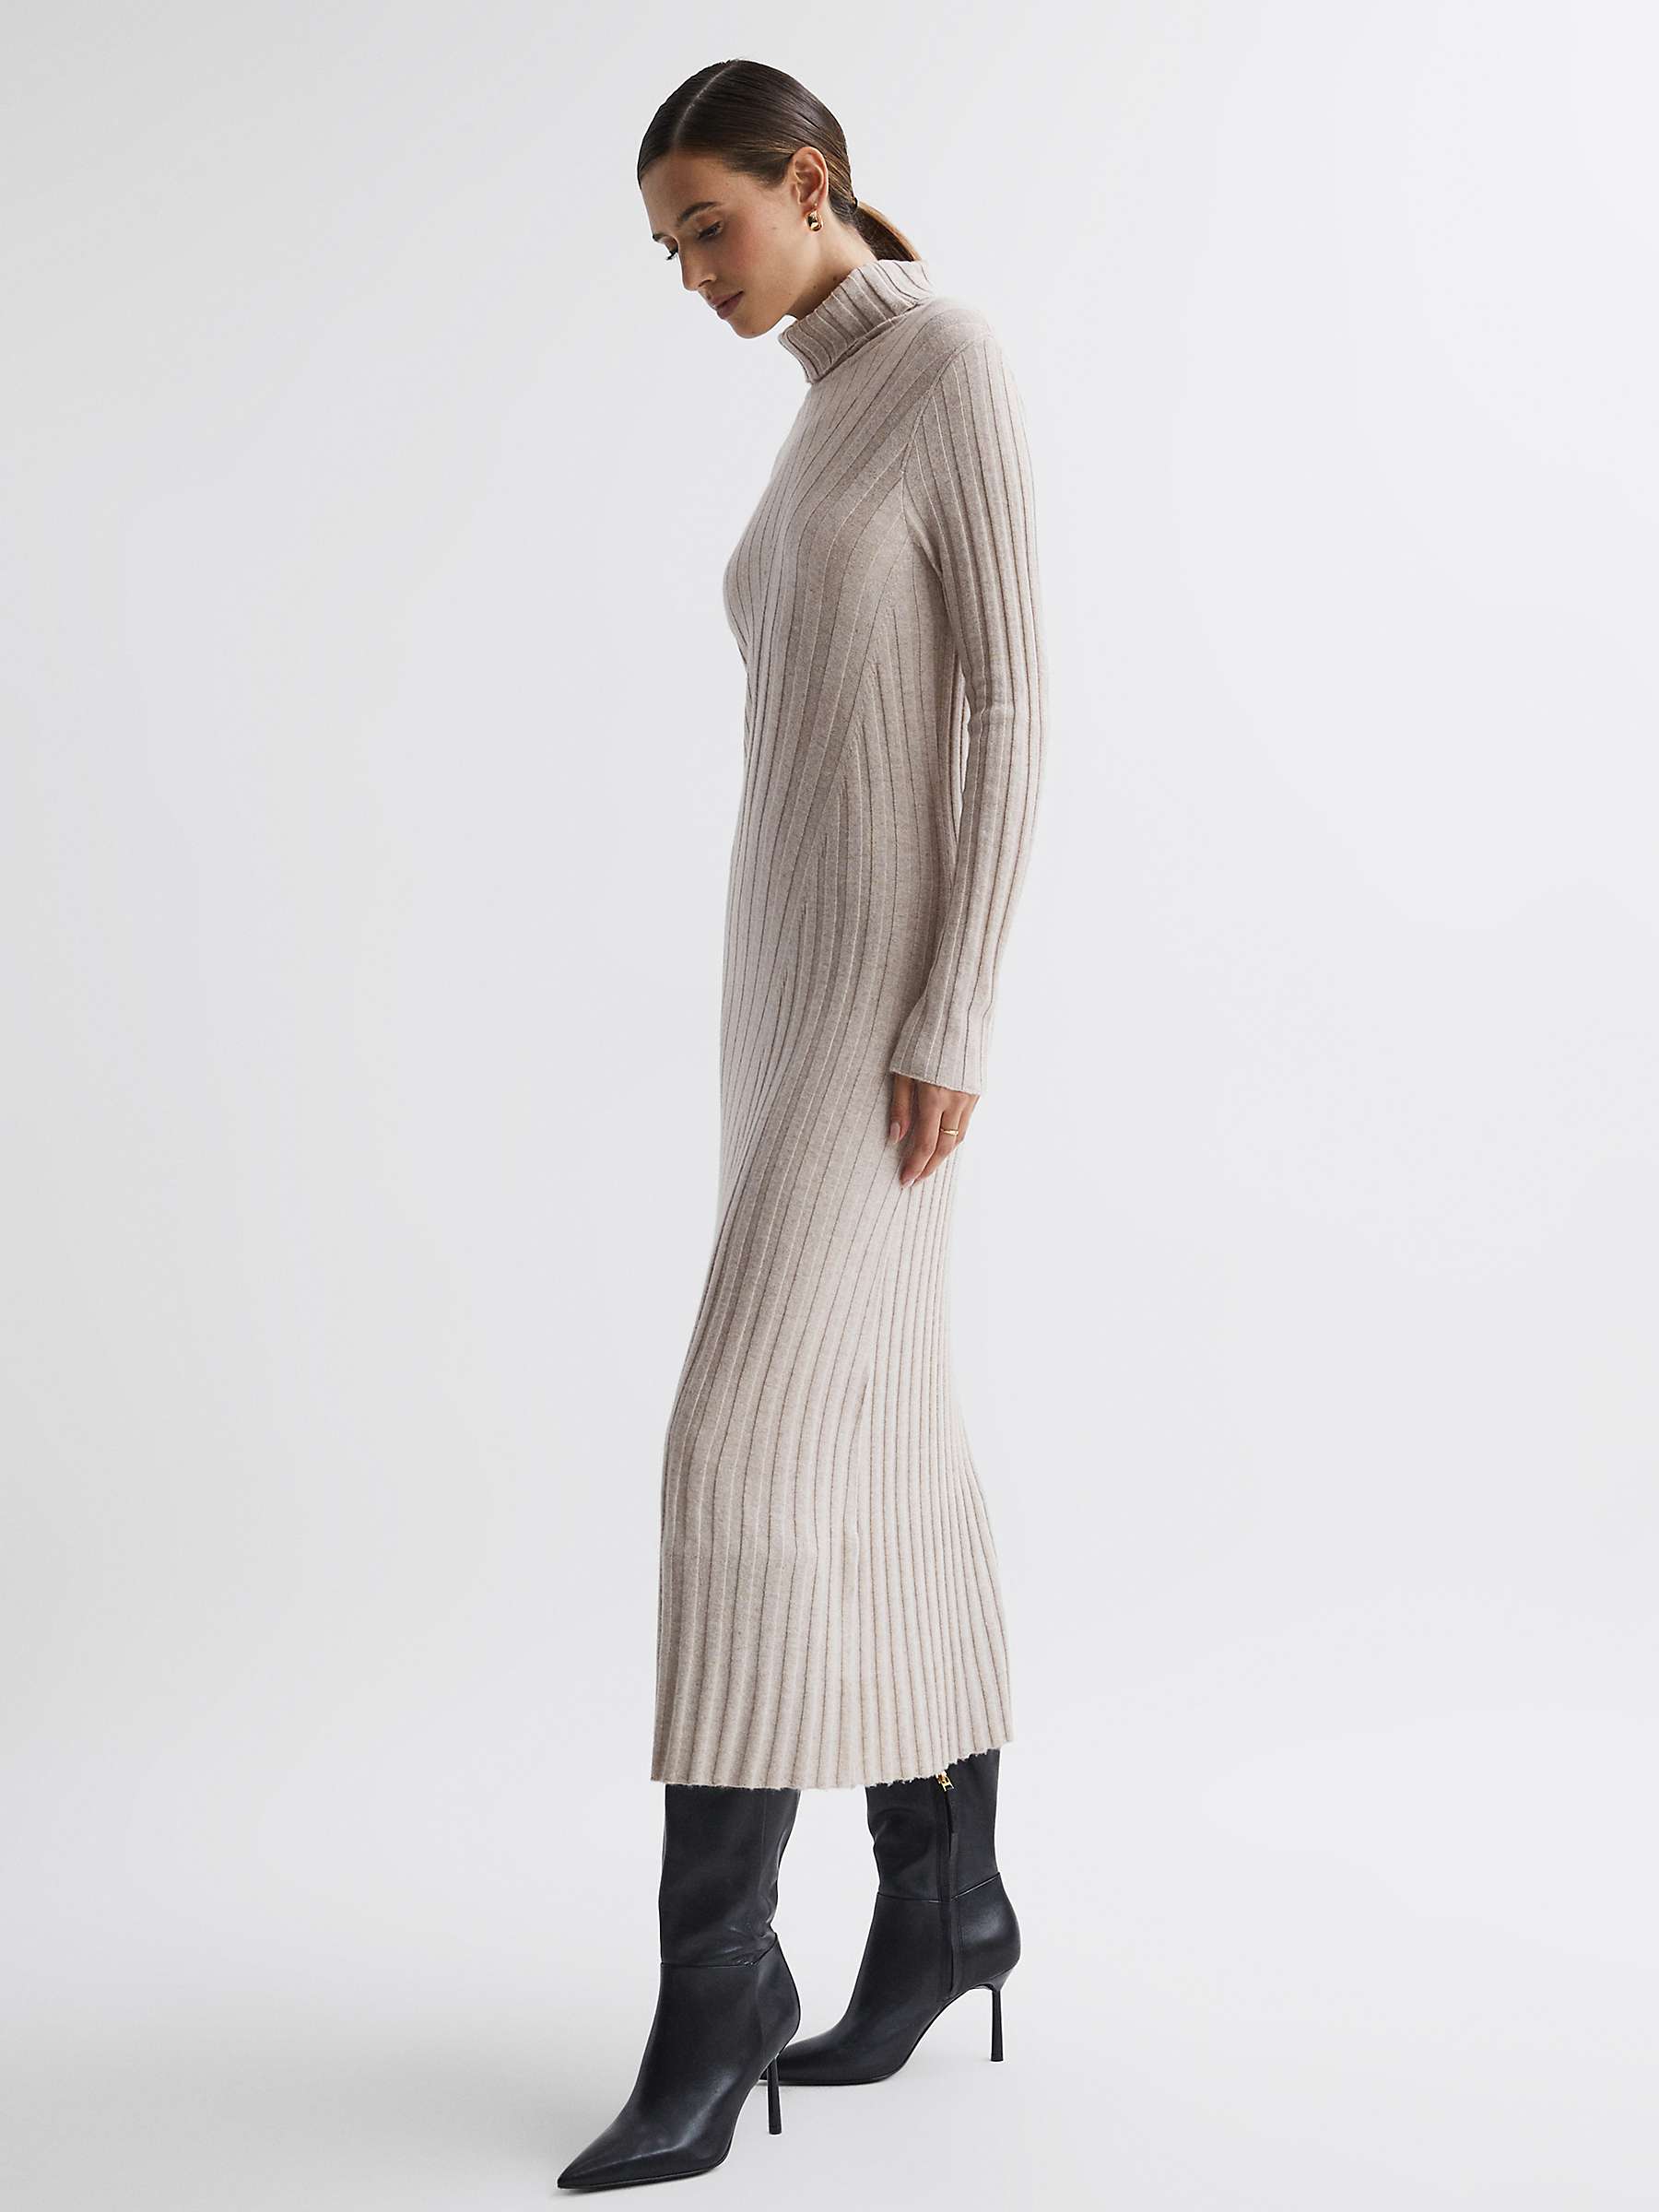 Buy Reiss Cady Ribbed Knit Roll Neck Midi Dress, Stone Online at johnlewis.com